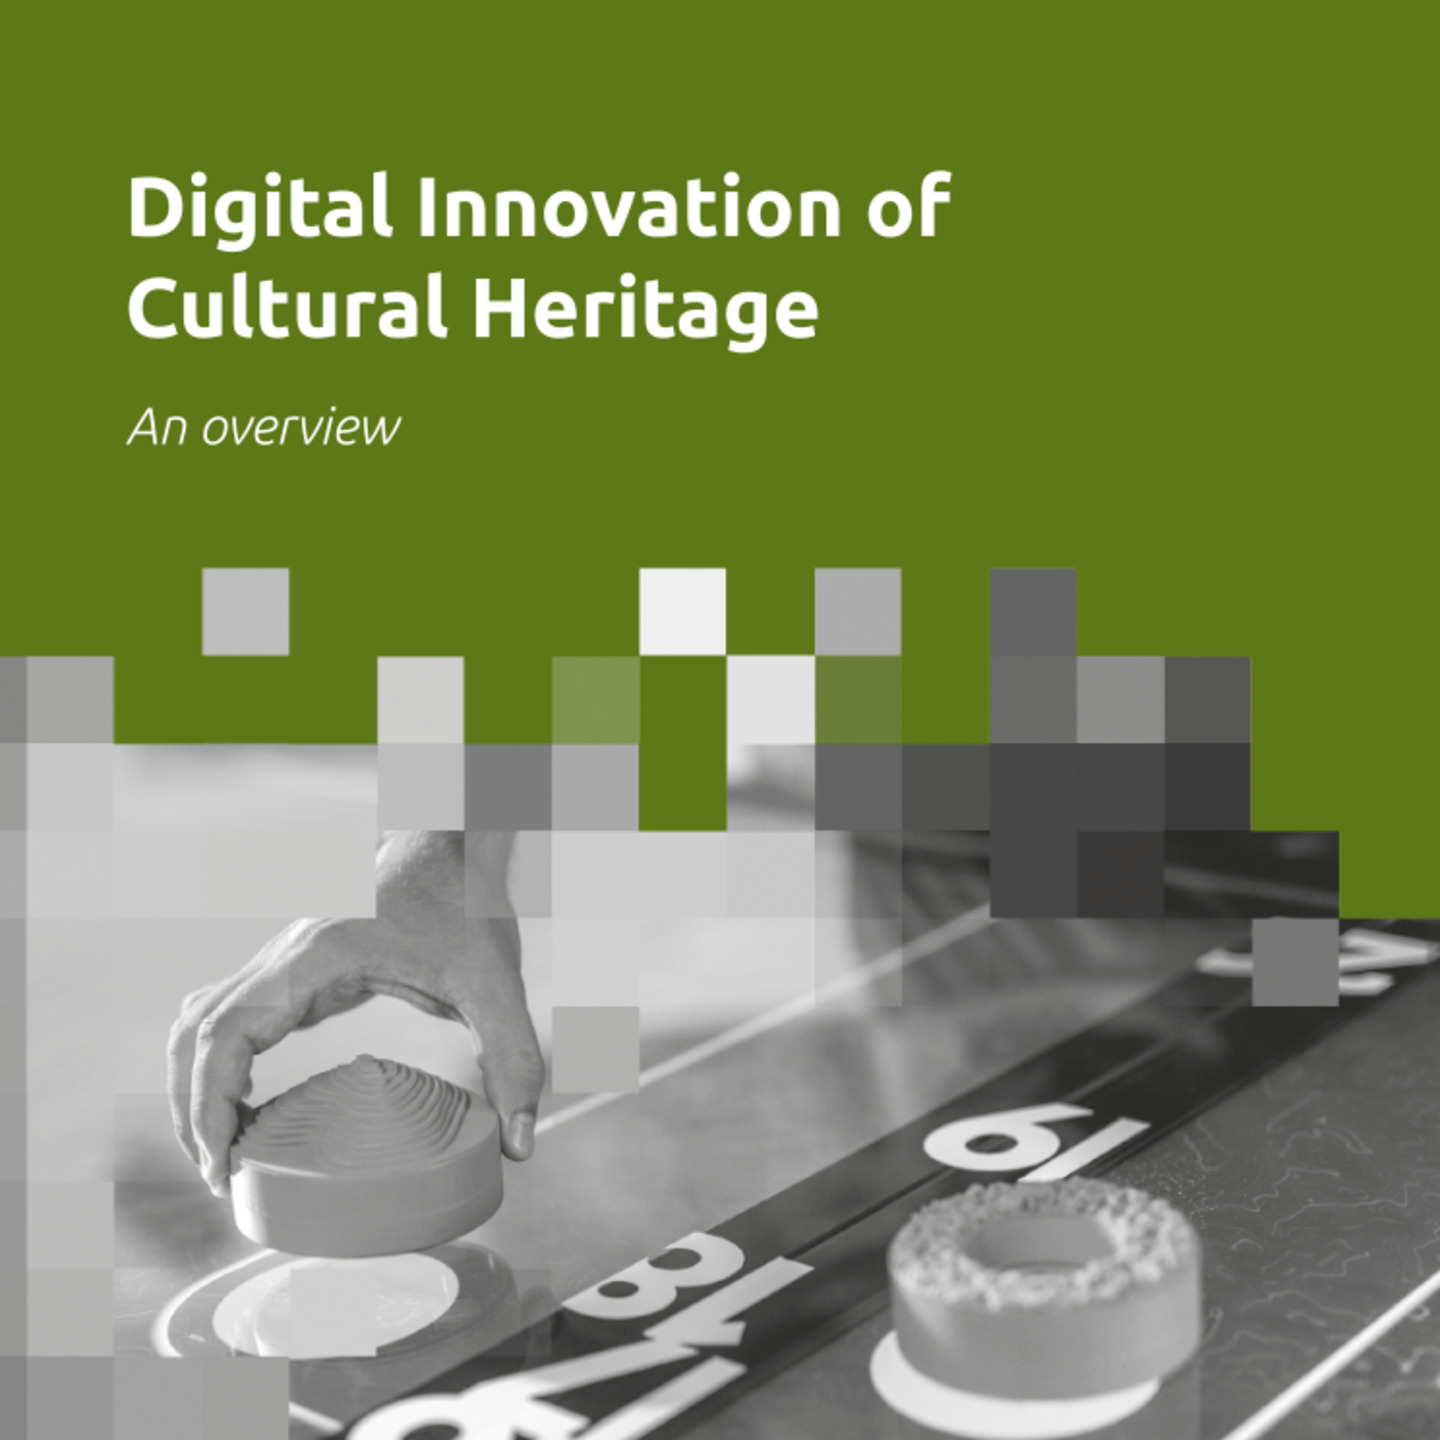 Digital Innovation of Cultural Heritage in Slovenia: An Overview